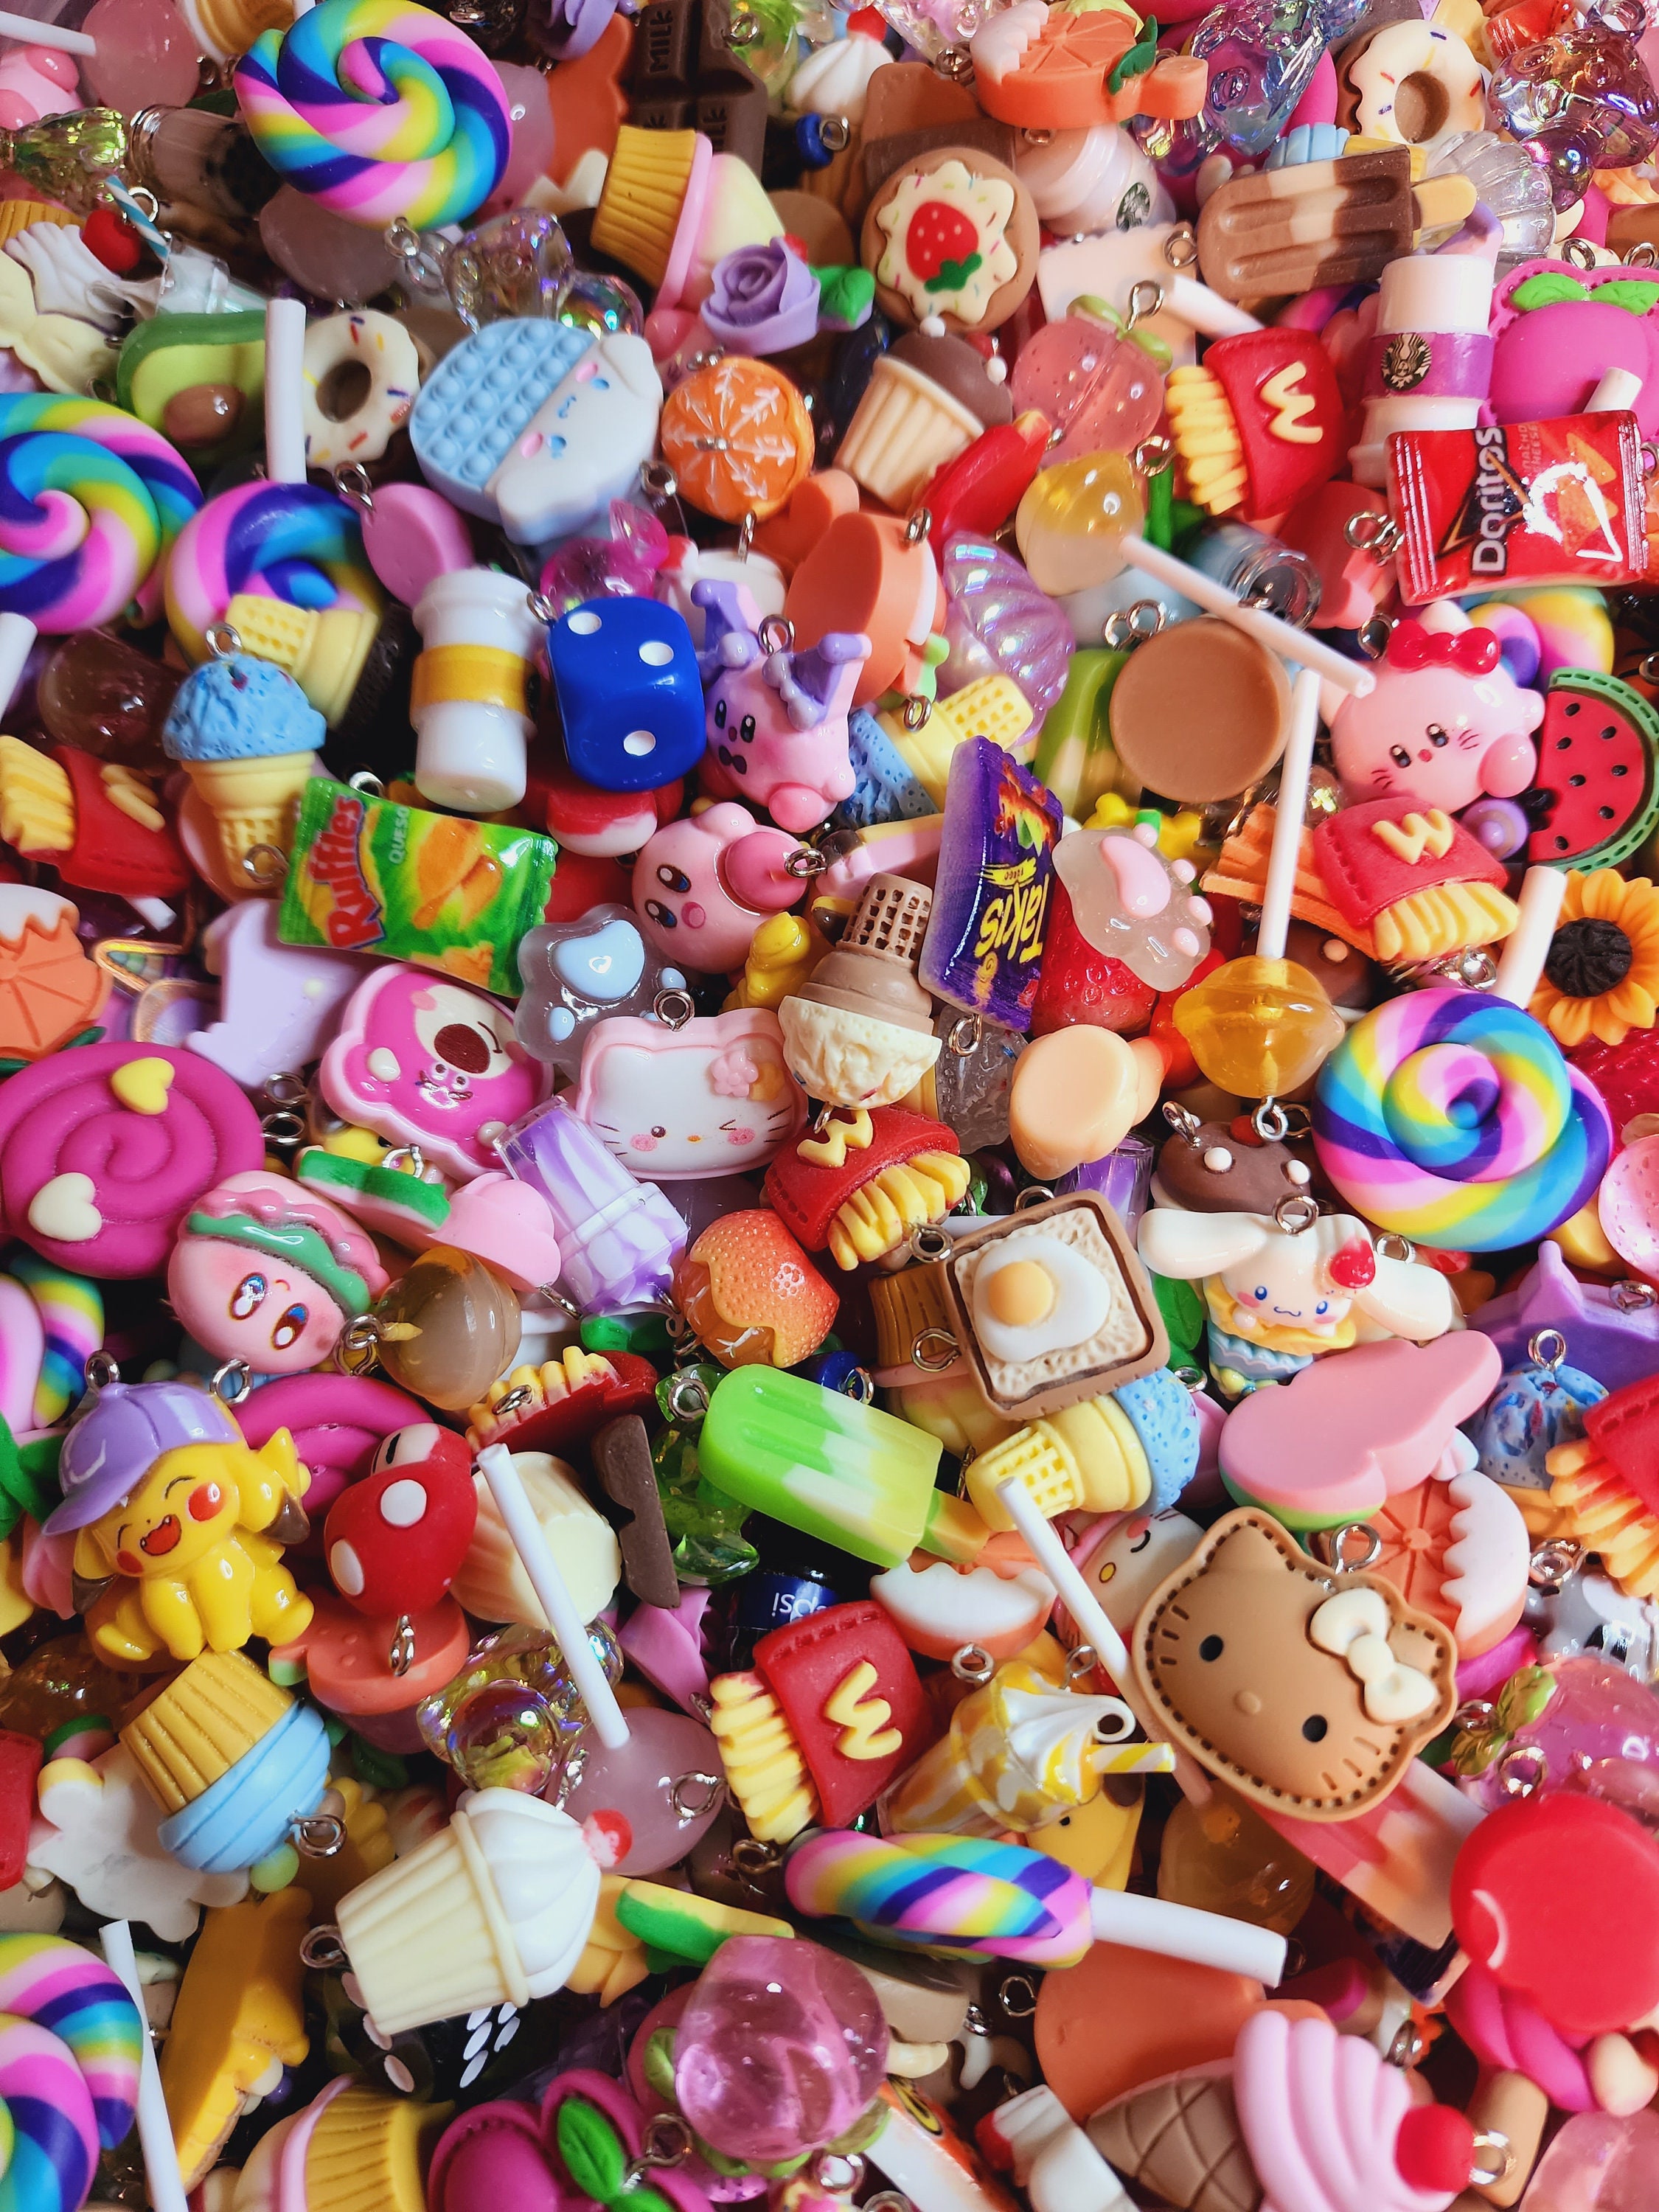 Charms Bulk, Charms Wholesale, Cute Charms, Kawaii Charms, Kawaii, Charms for Bracelets, Charms for Necklace, Charms for Earrings